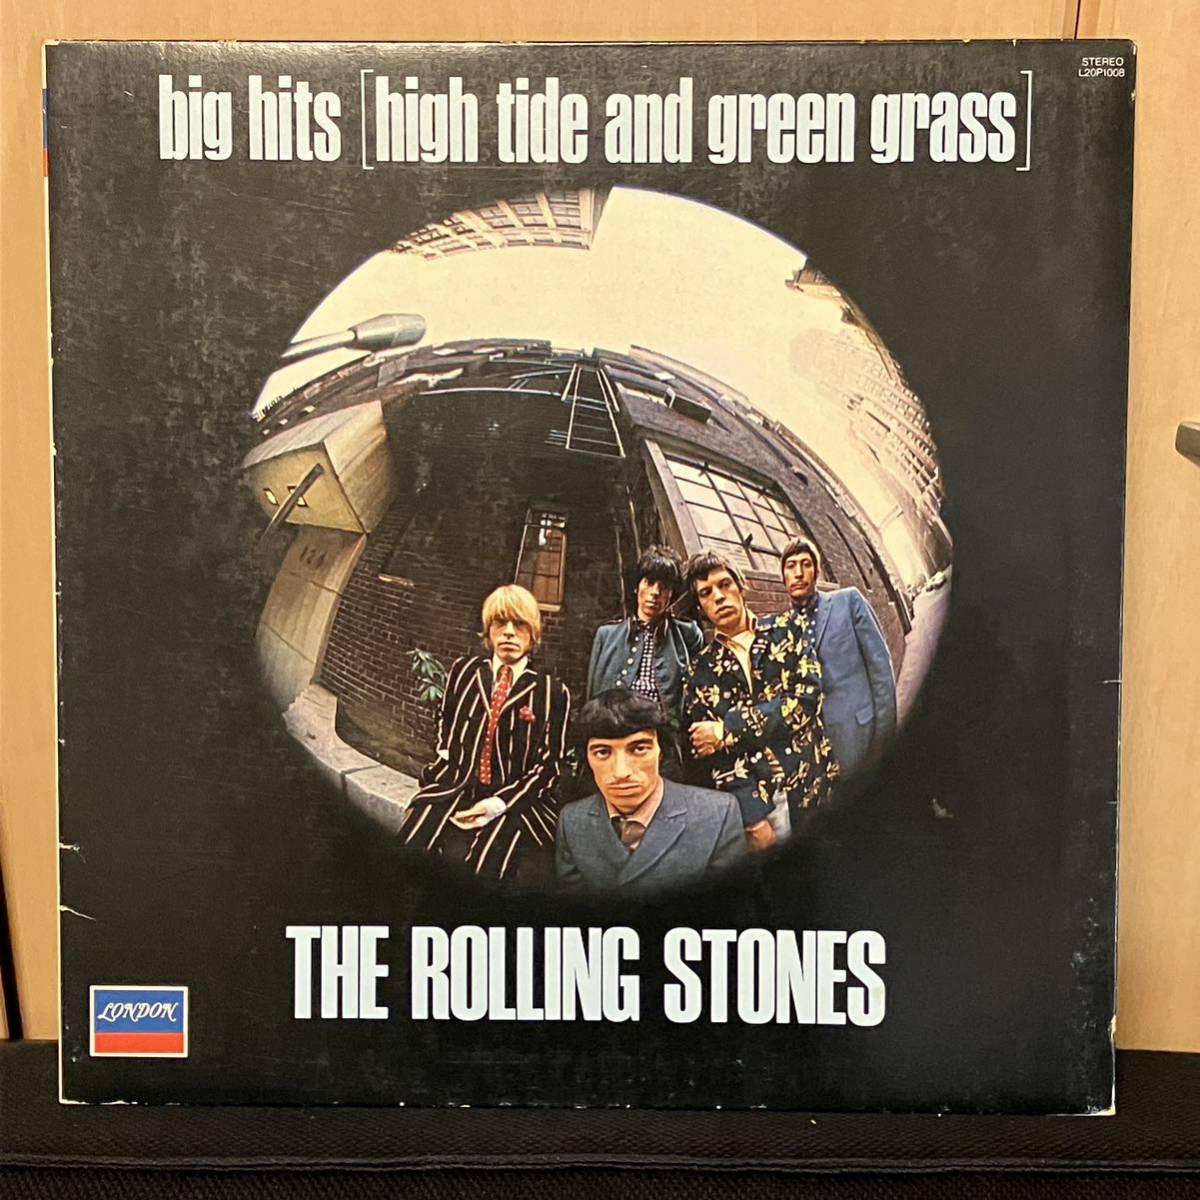 The Rolling Stones - Big Hits (High Tide And Green Grass) ローリング・ストーンズ ビッグ・ヒッツ 日本盤_画像1